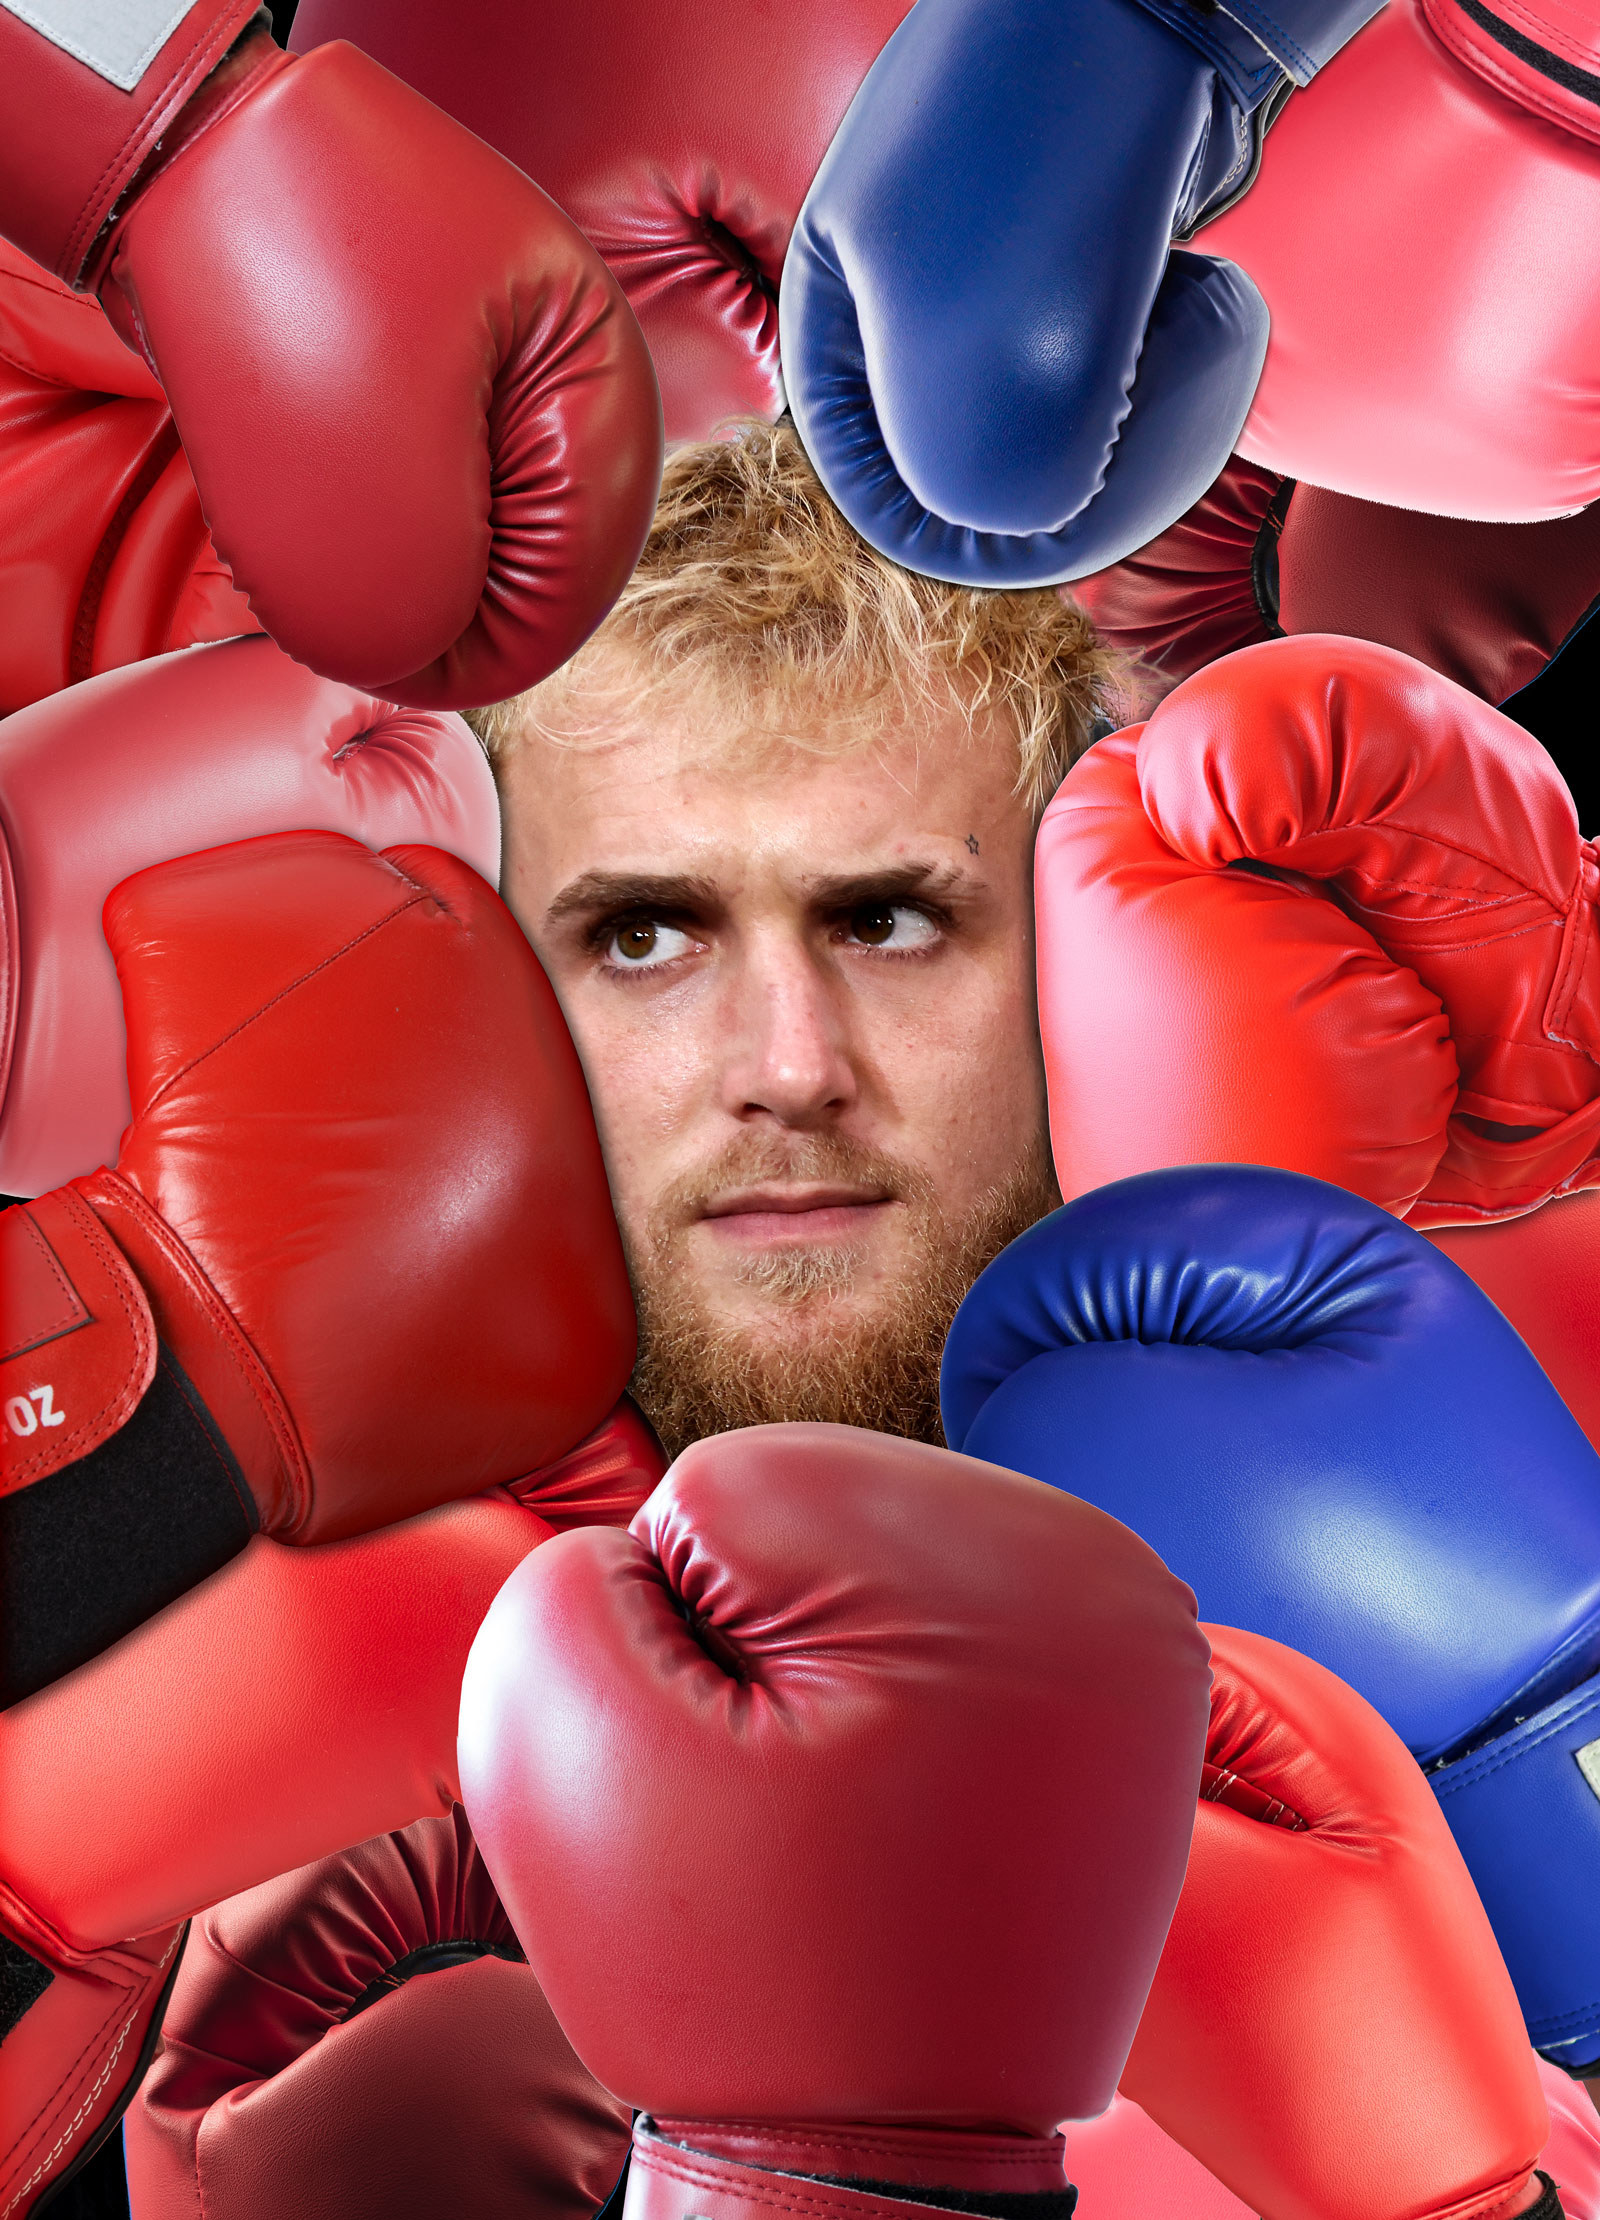 Jake Pauls Content Creation Has Shaped His Career As A Professional Boxer picture